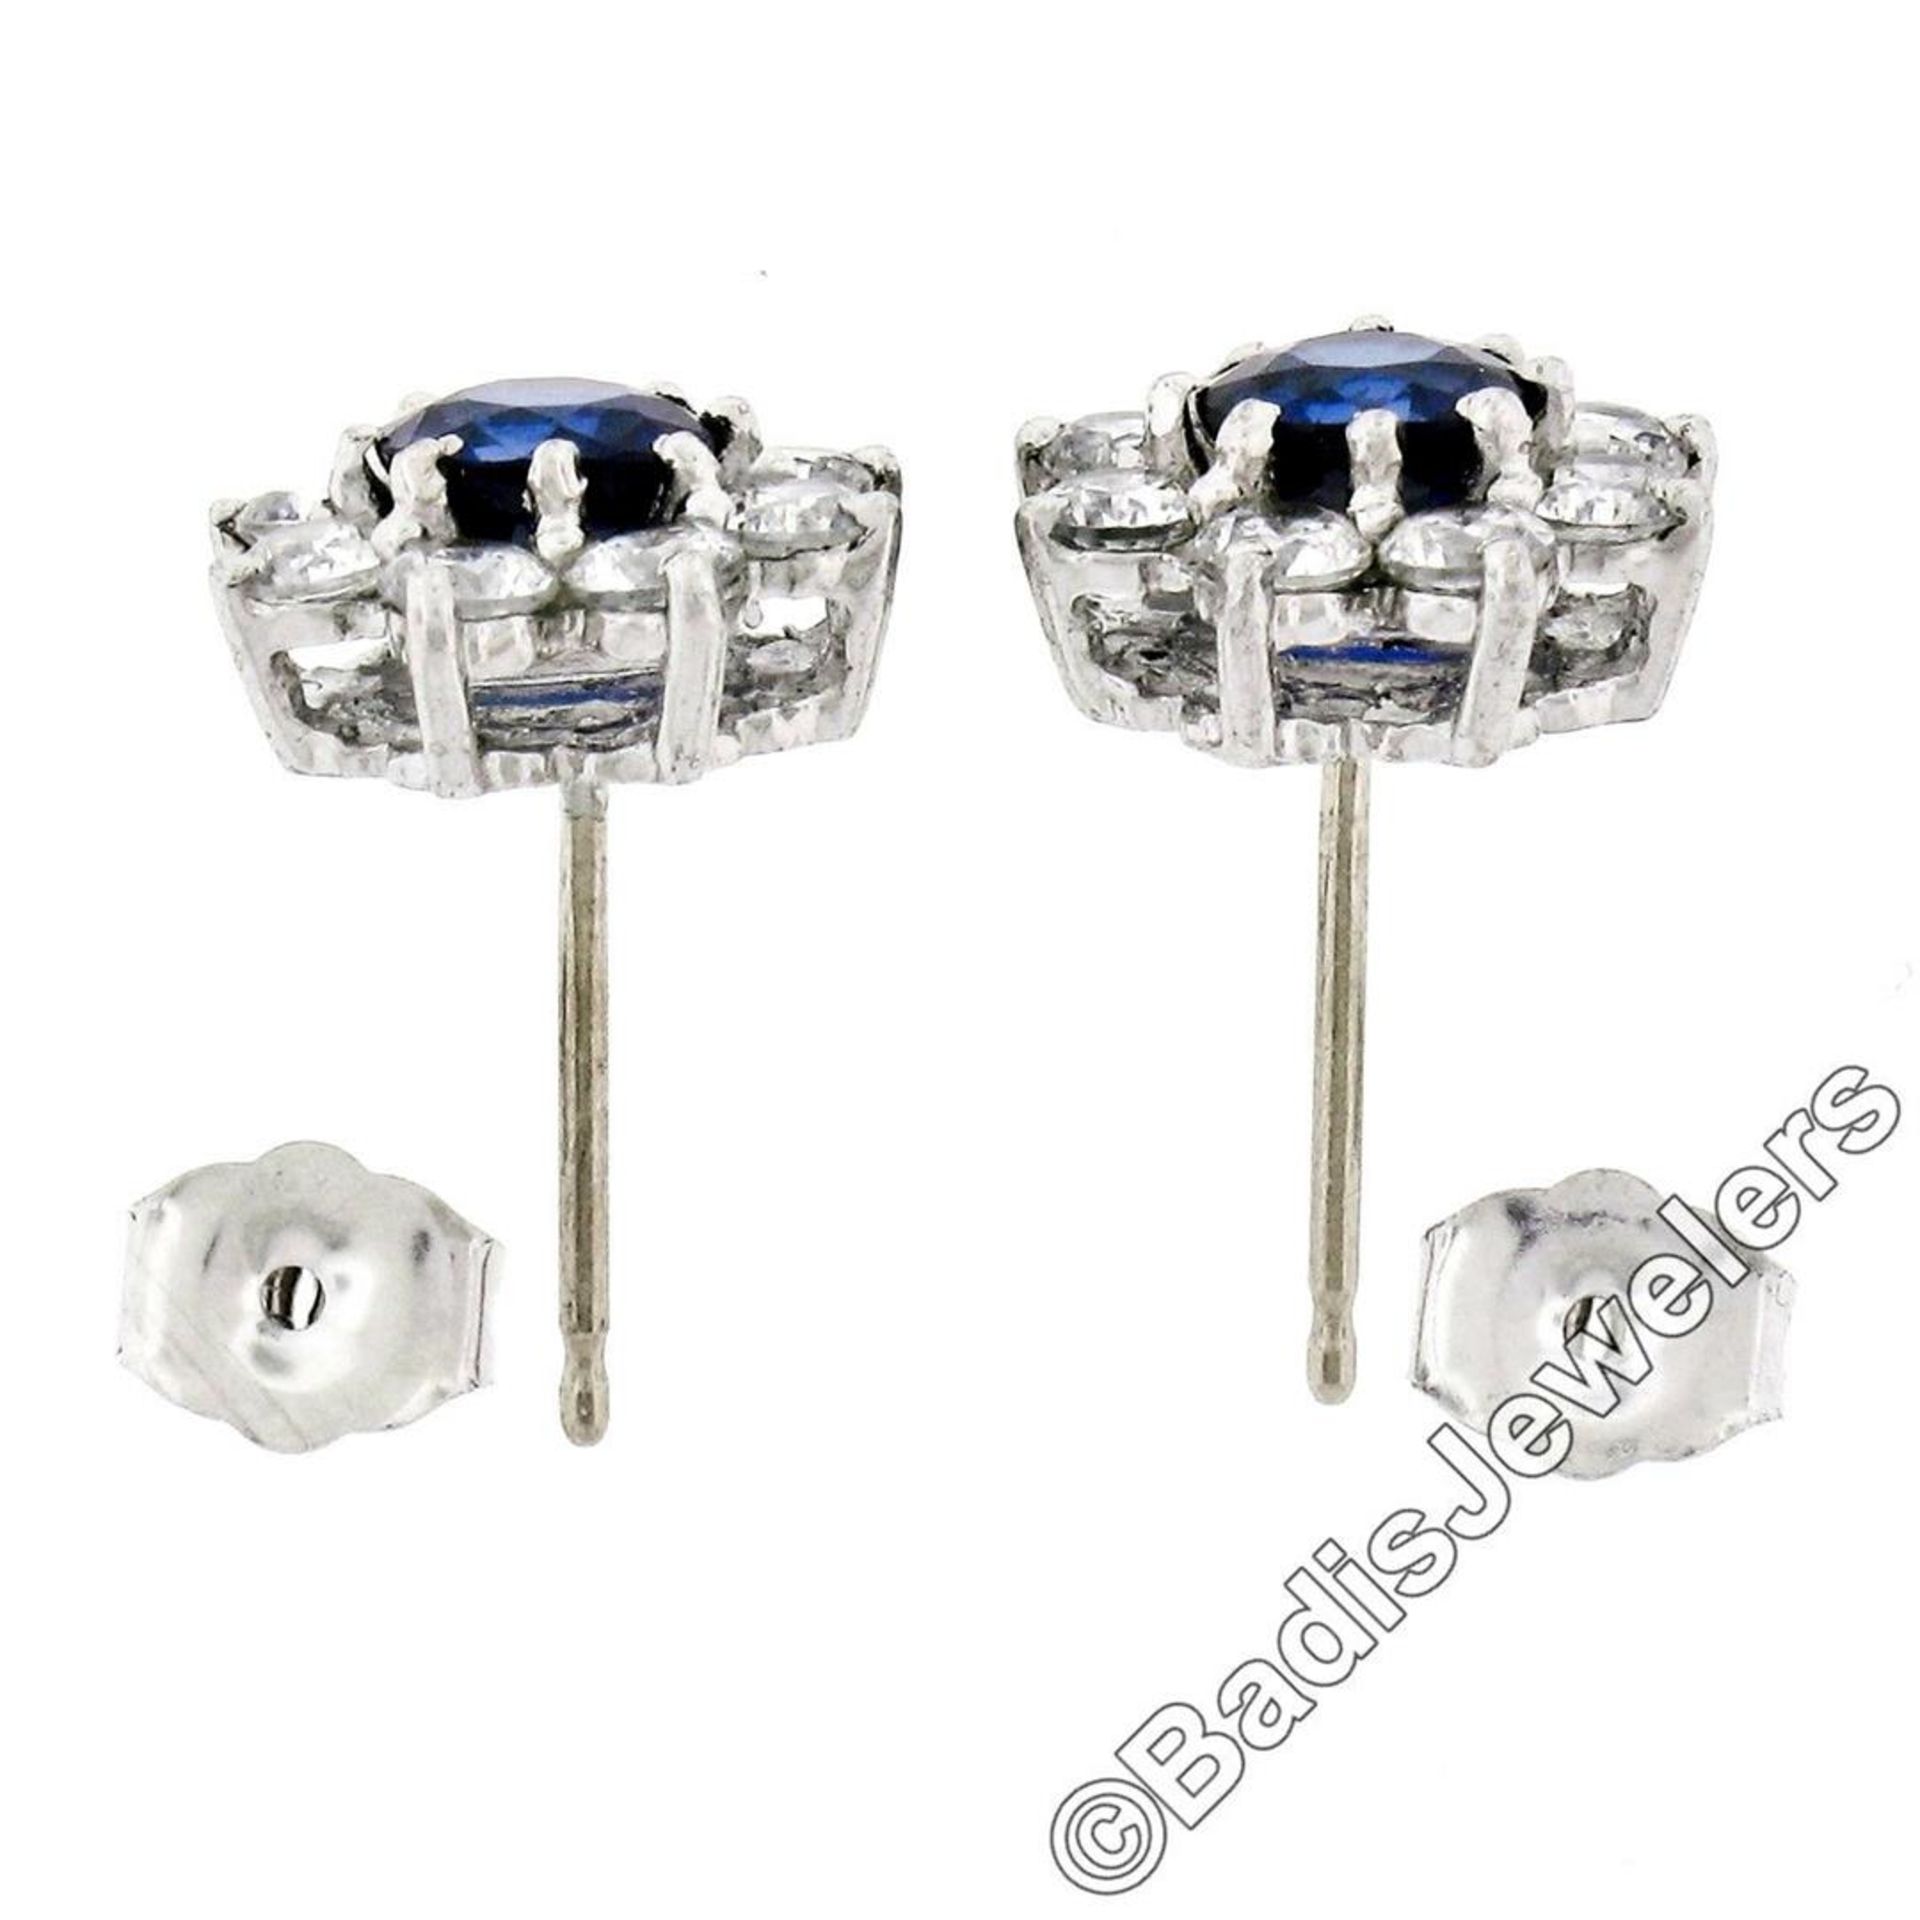 Sterling Silver Blue Crystal & CZ Halo Stud Earrings w/ 14kt White Gold Posts - Image 4 of 5